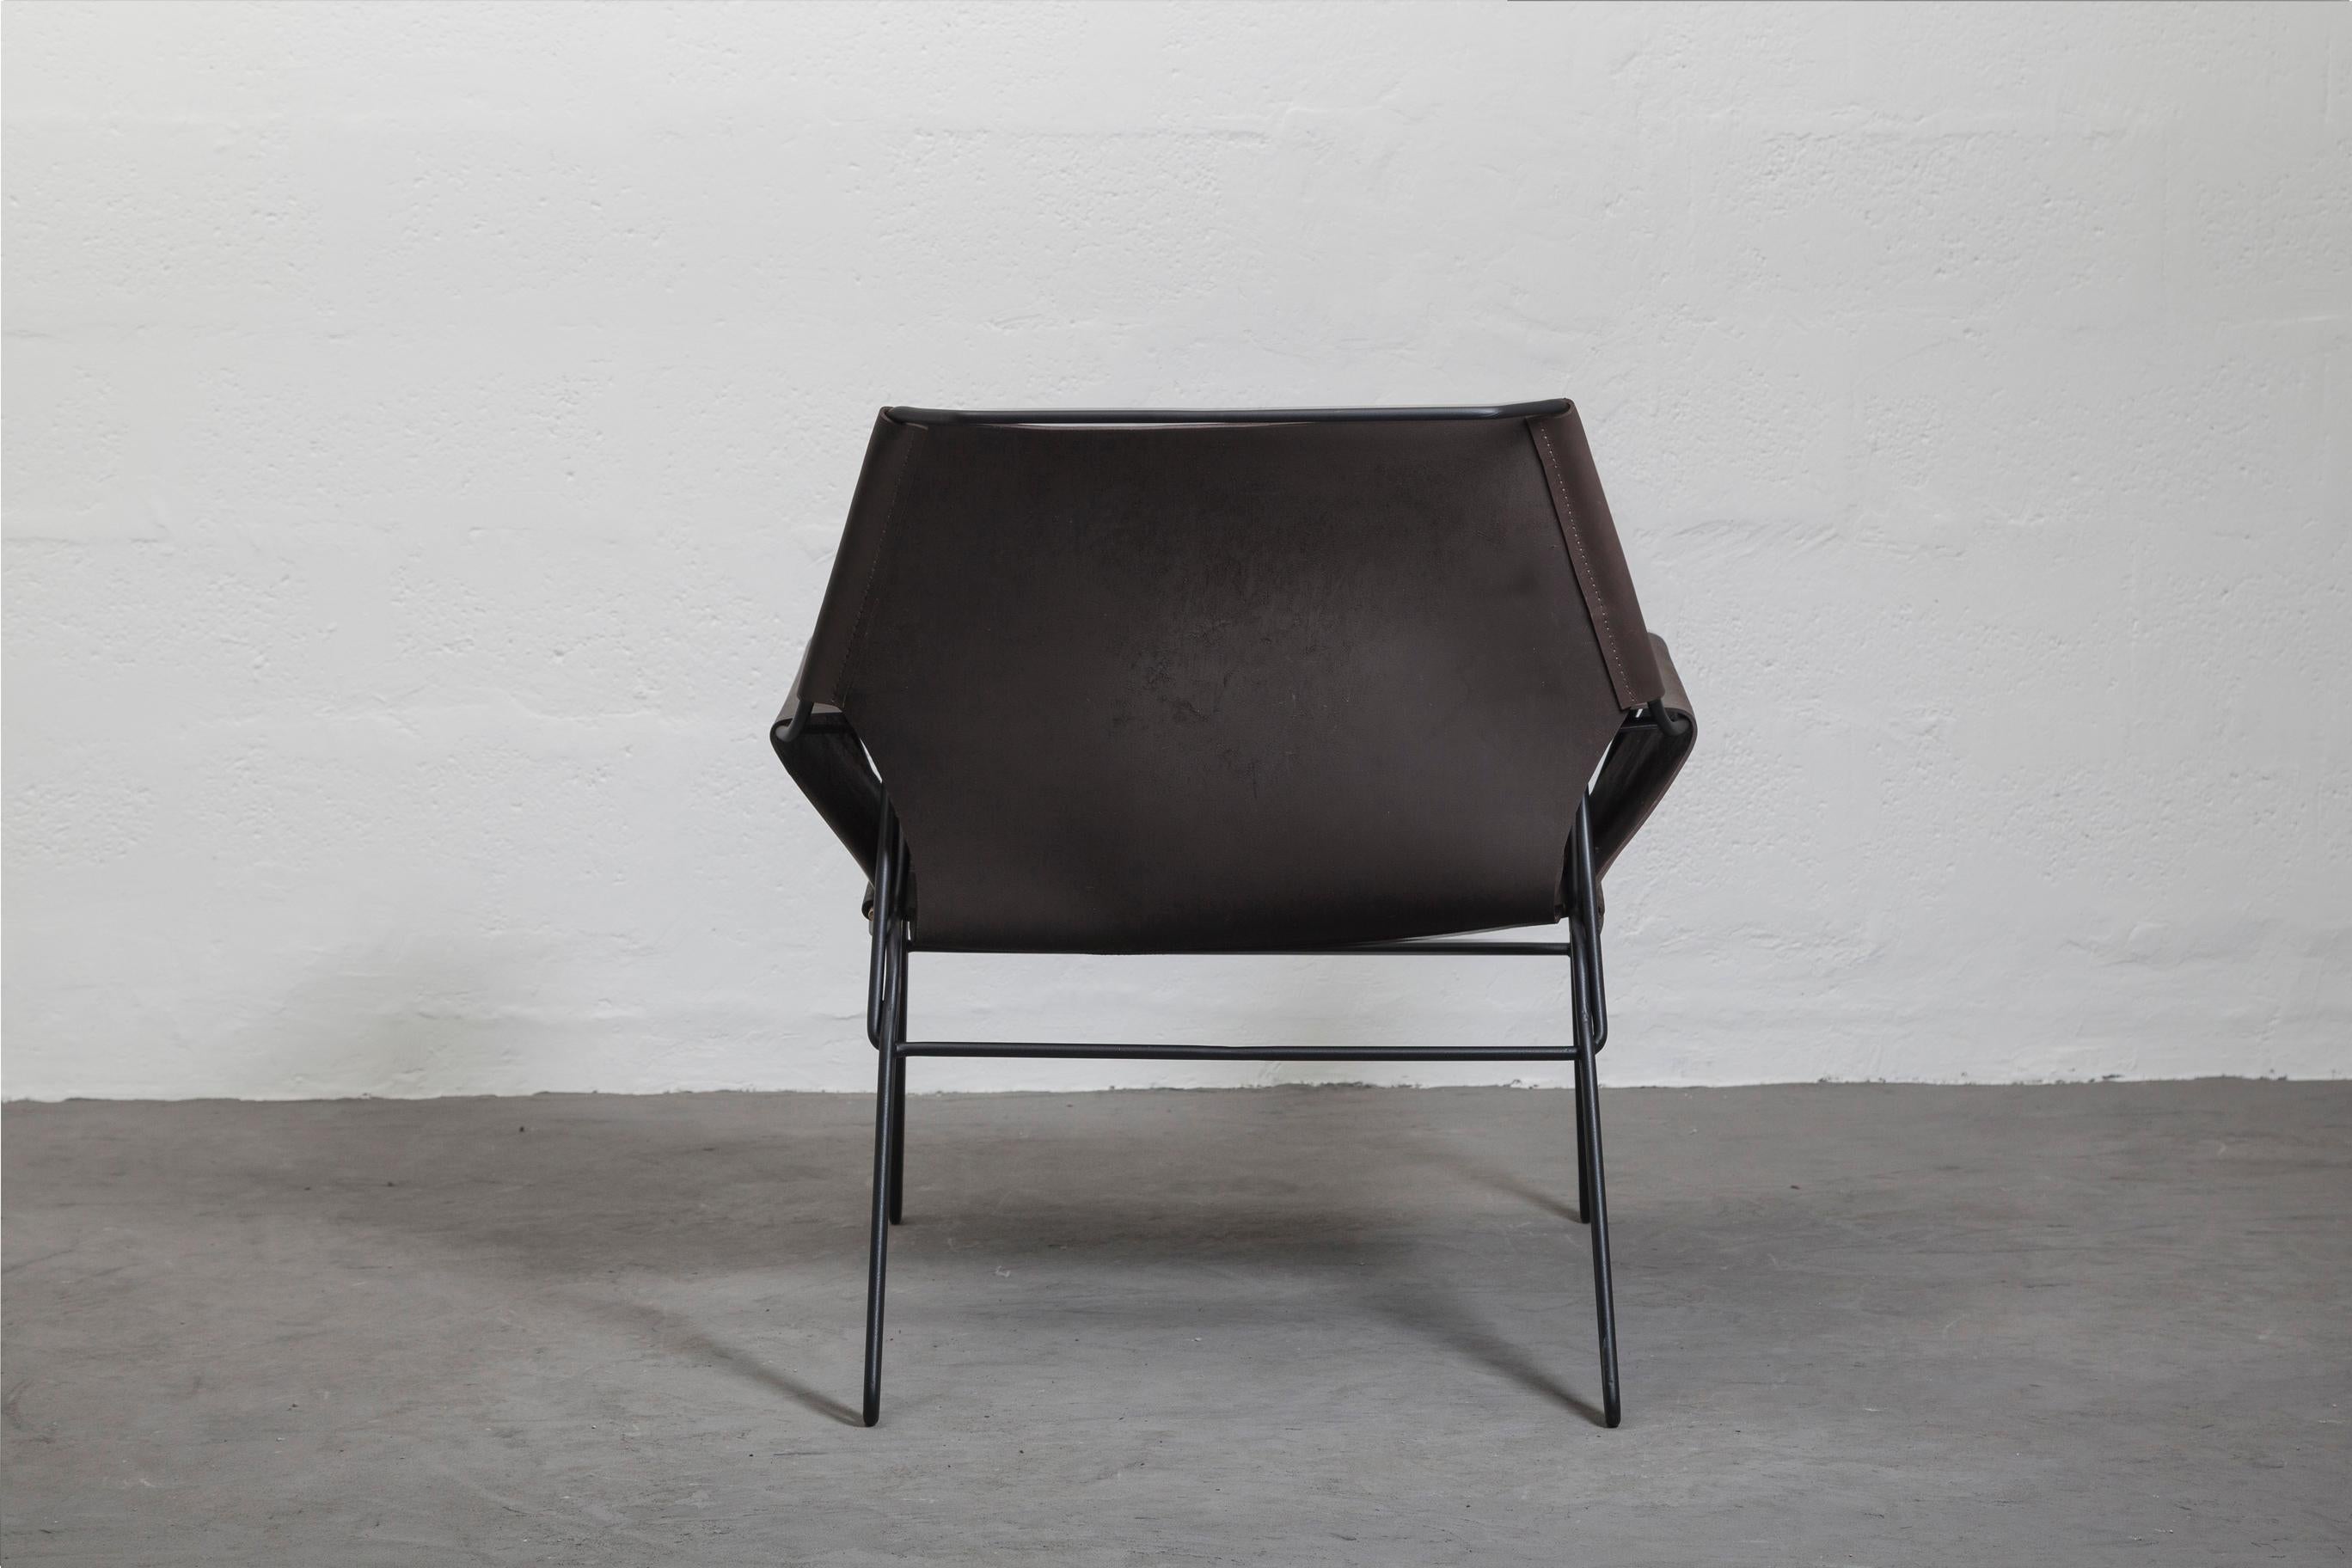 Perfidia_02 Lounge Chair Brown by ANDEAN, Represented by Tuleste Factory In New Condition For Sale In New York, NY